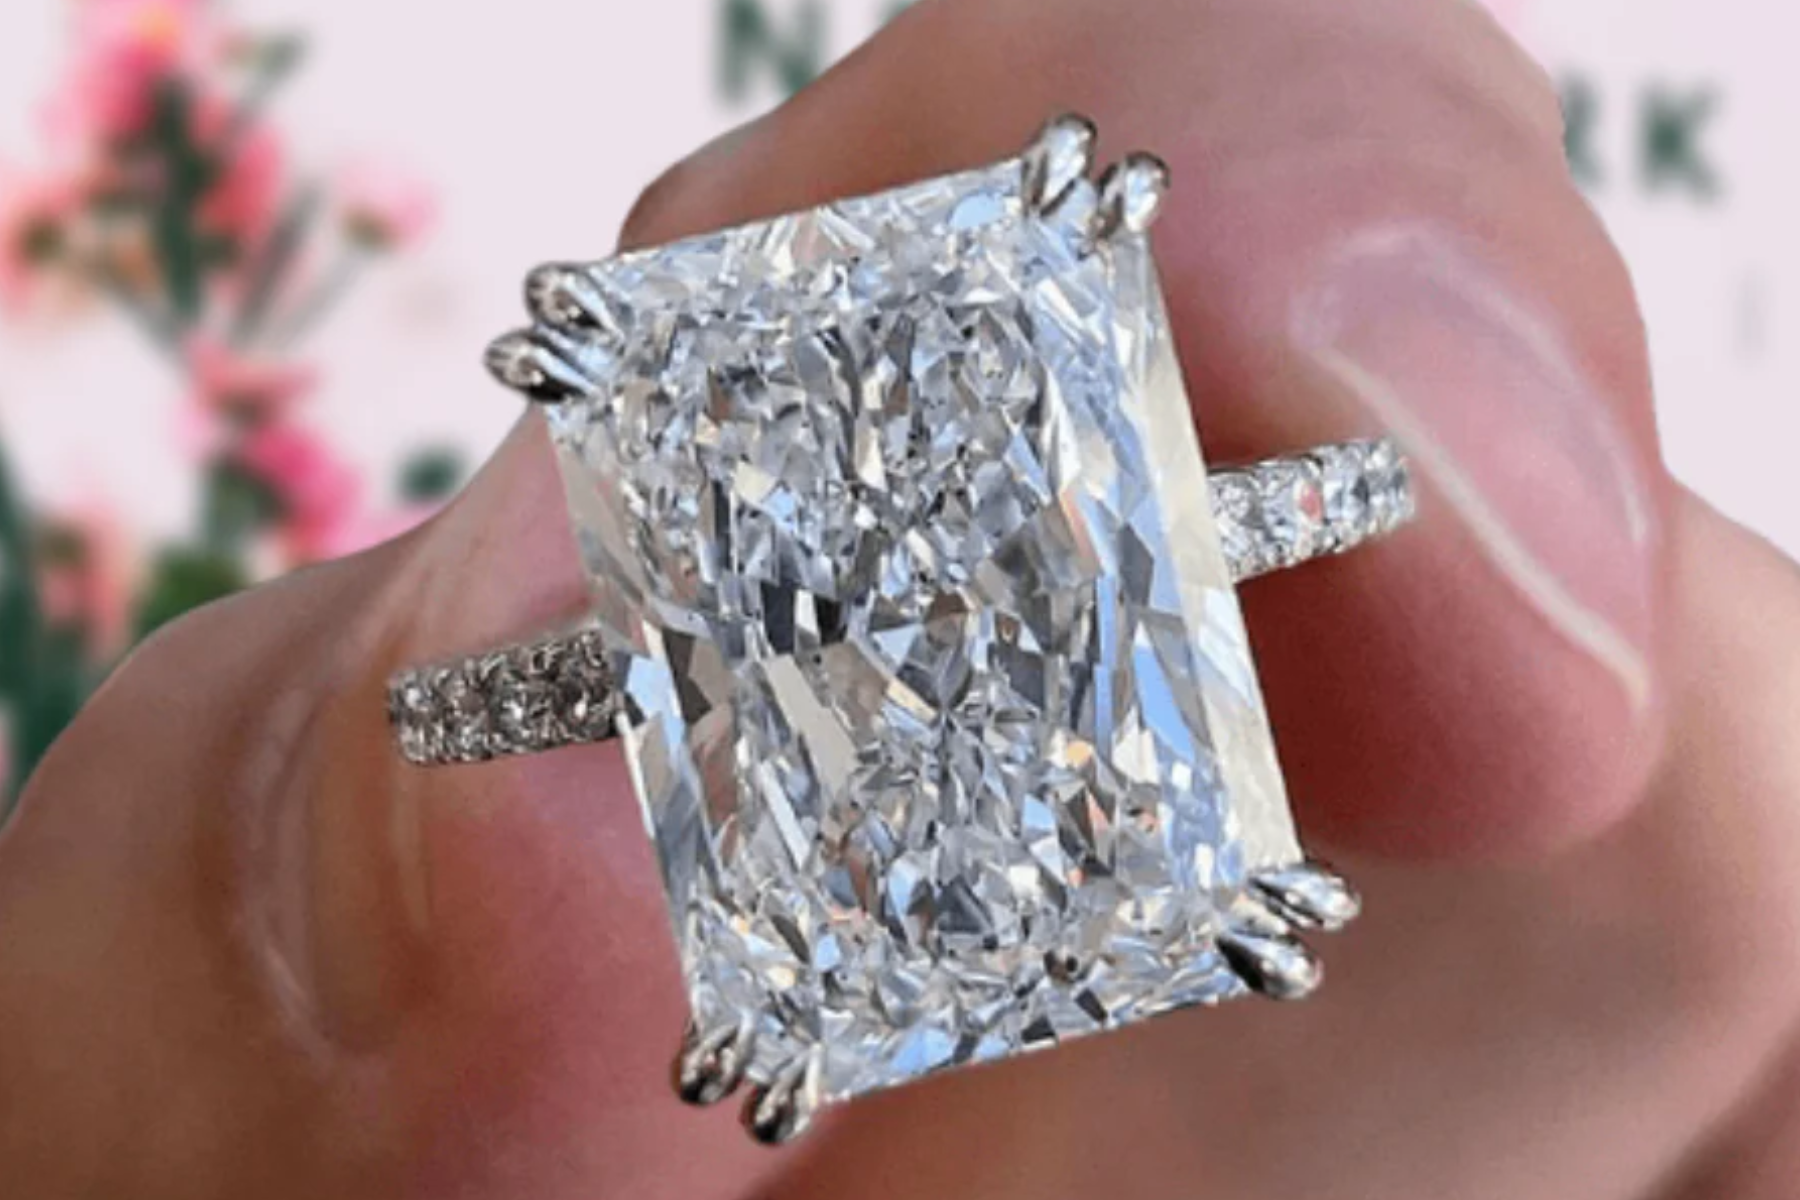 A close-up photograph of a hand carrying an engagement ring with a large radiant-cut diamond